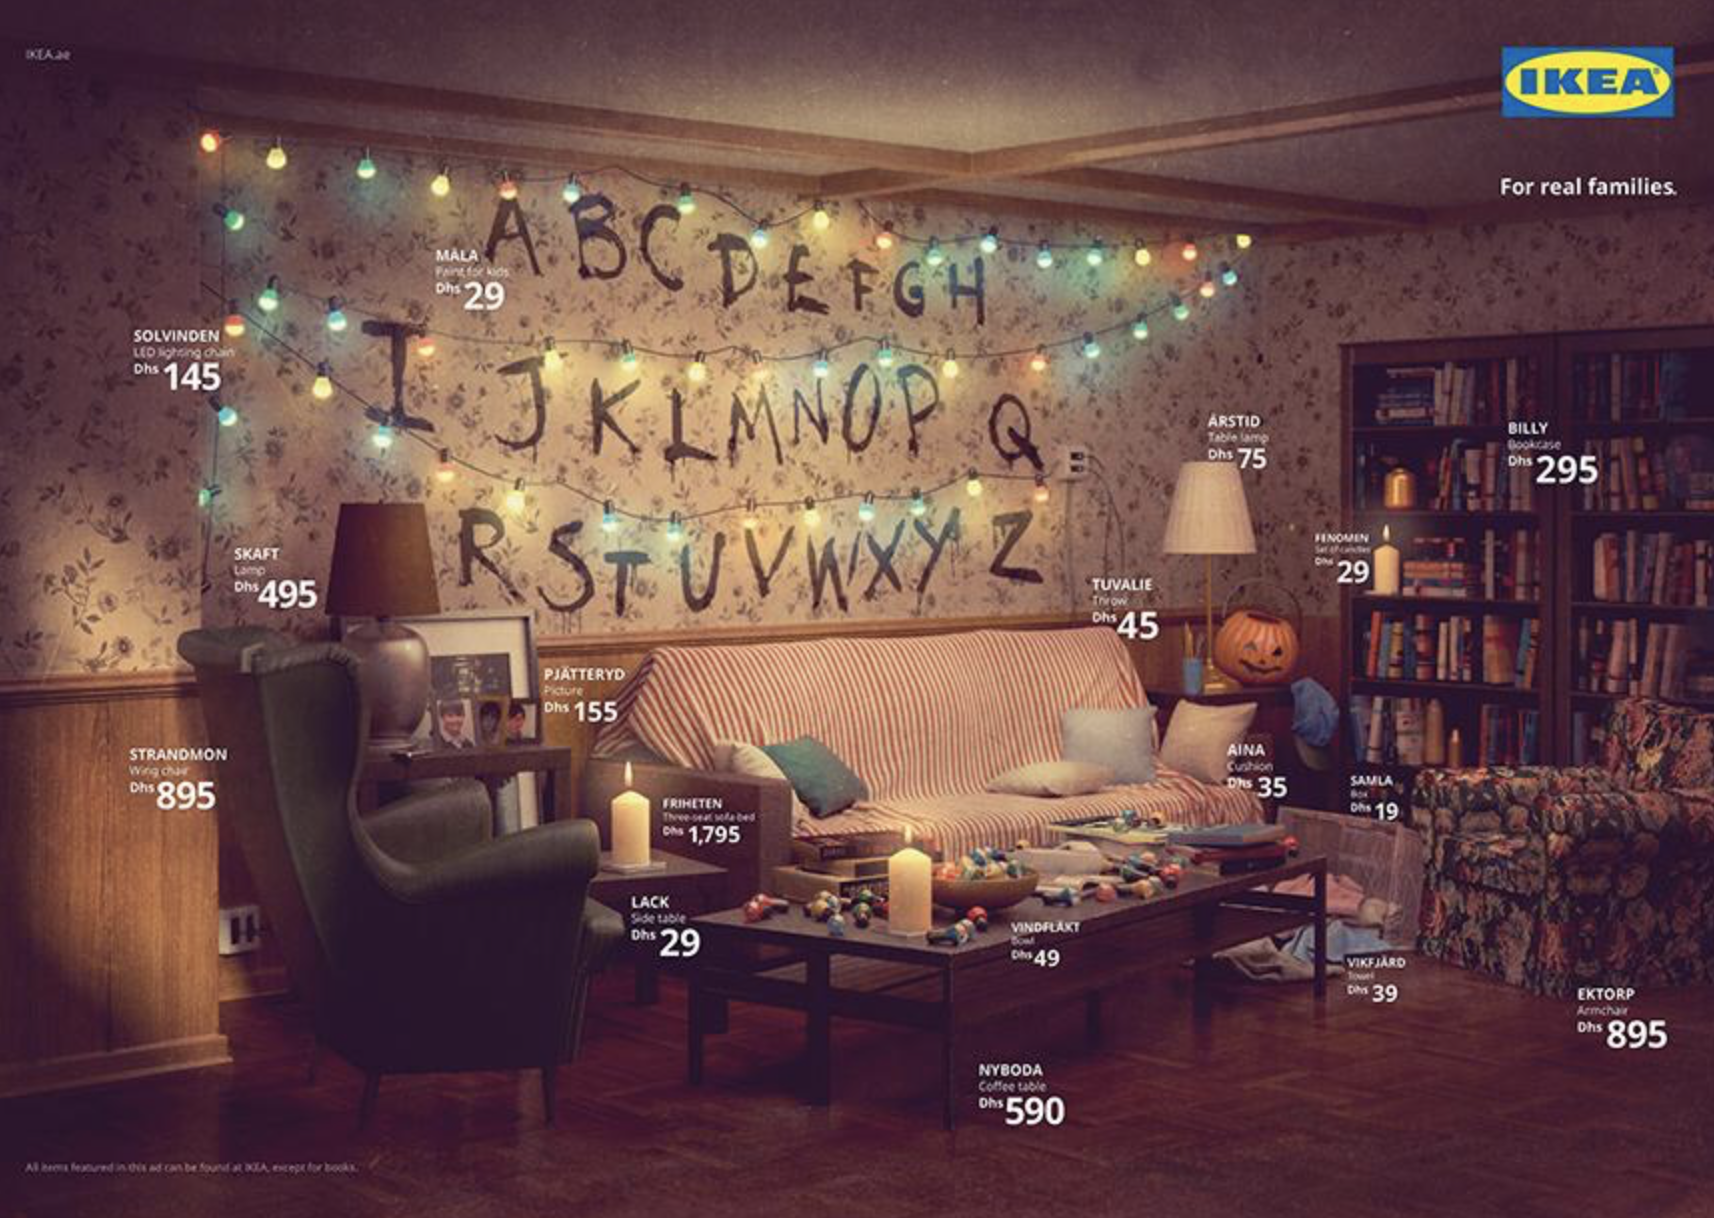 This "Stranger Things" inspired room was made by IKEA